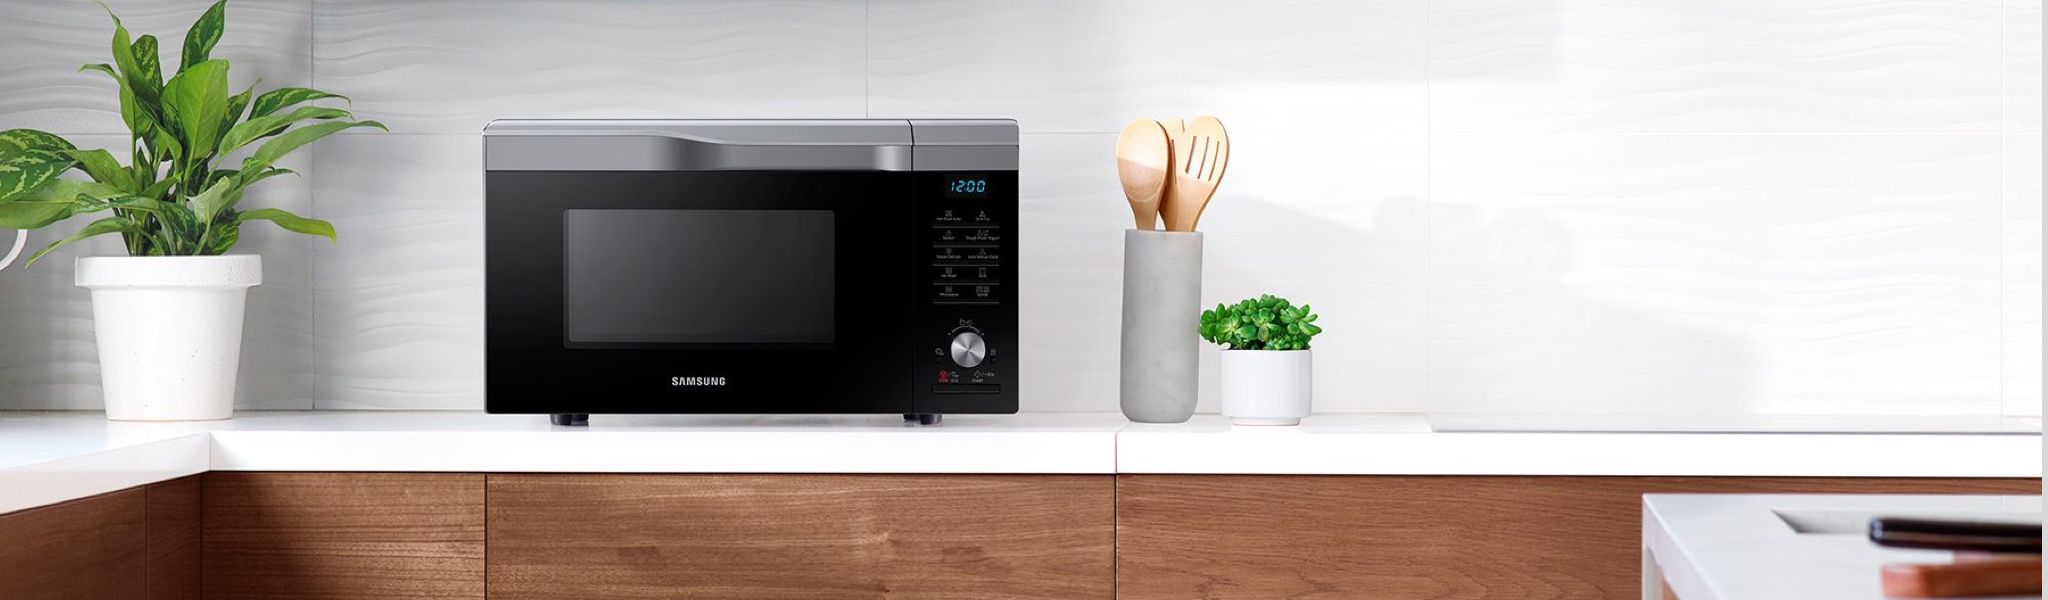 microwave oven in a kitchen